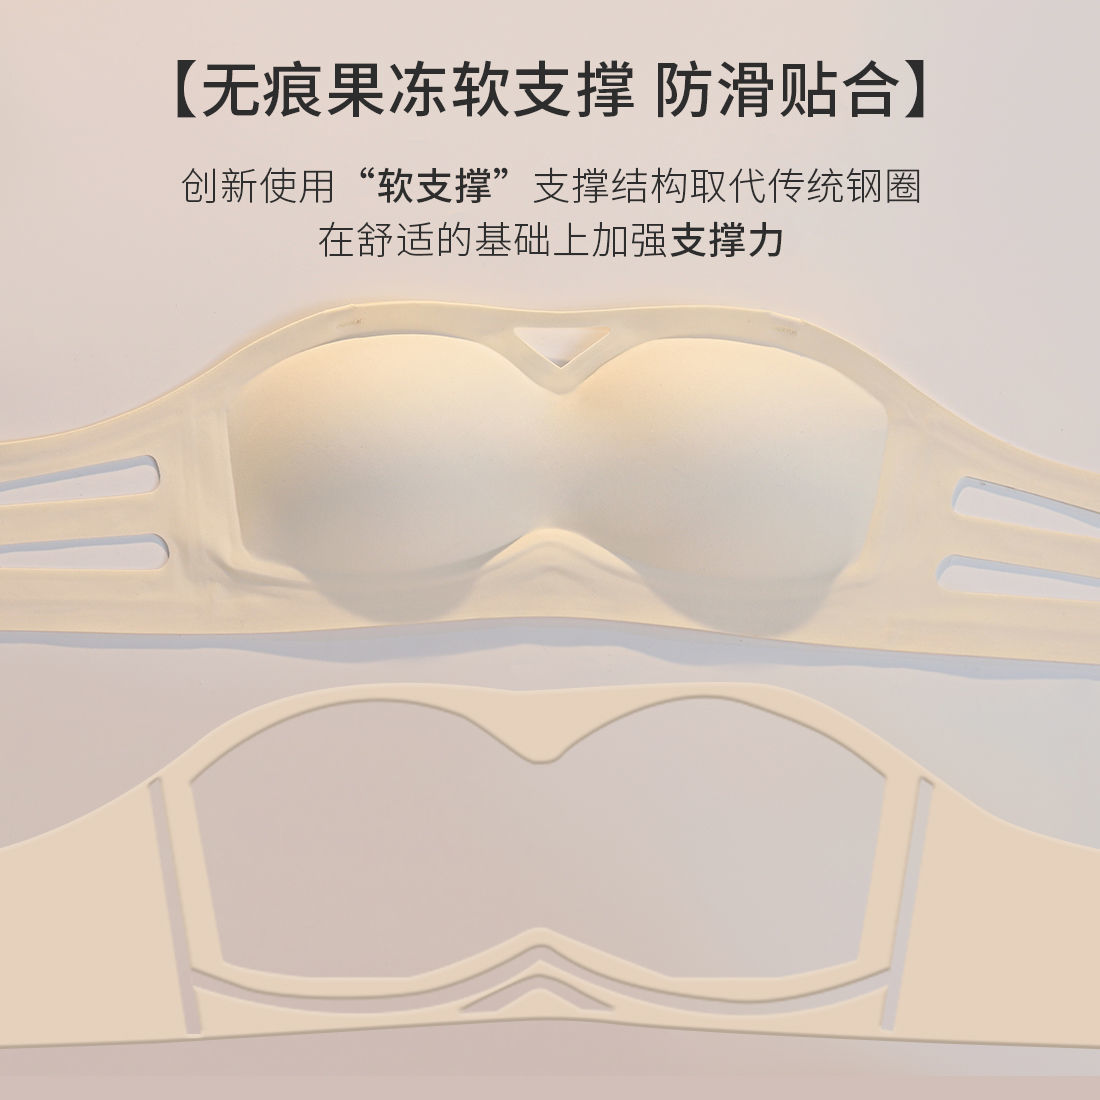 Strapless underwear women's non-steel ring wrapped chest non-slip small chest gathered breasts anti-light tube top summer bra